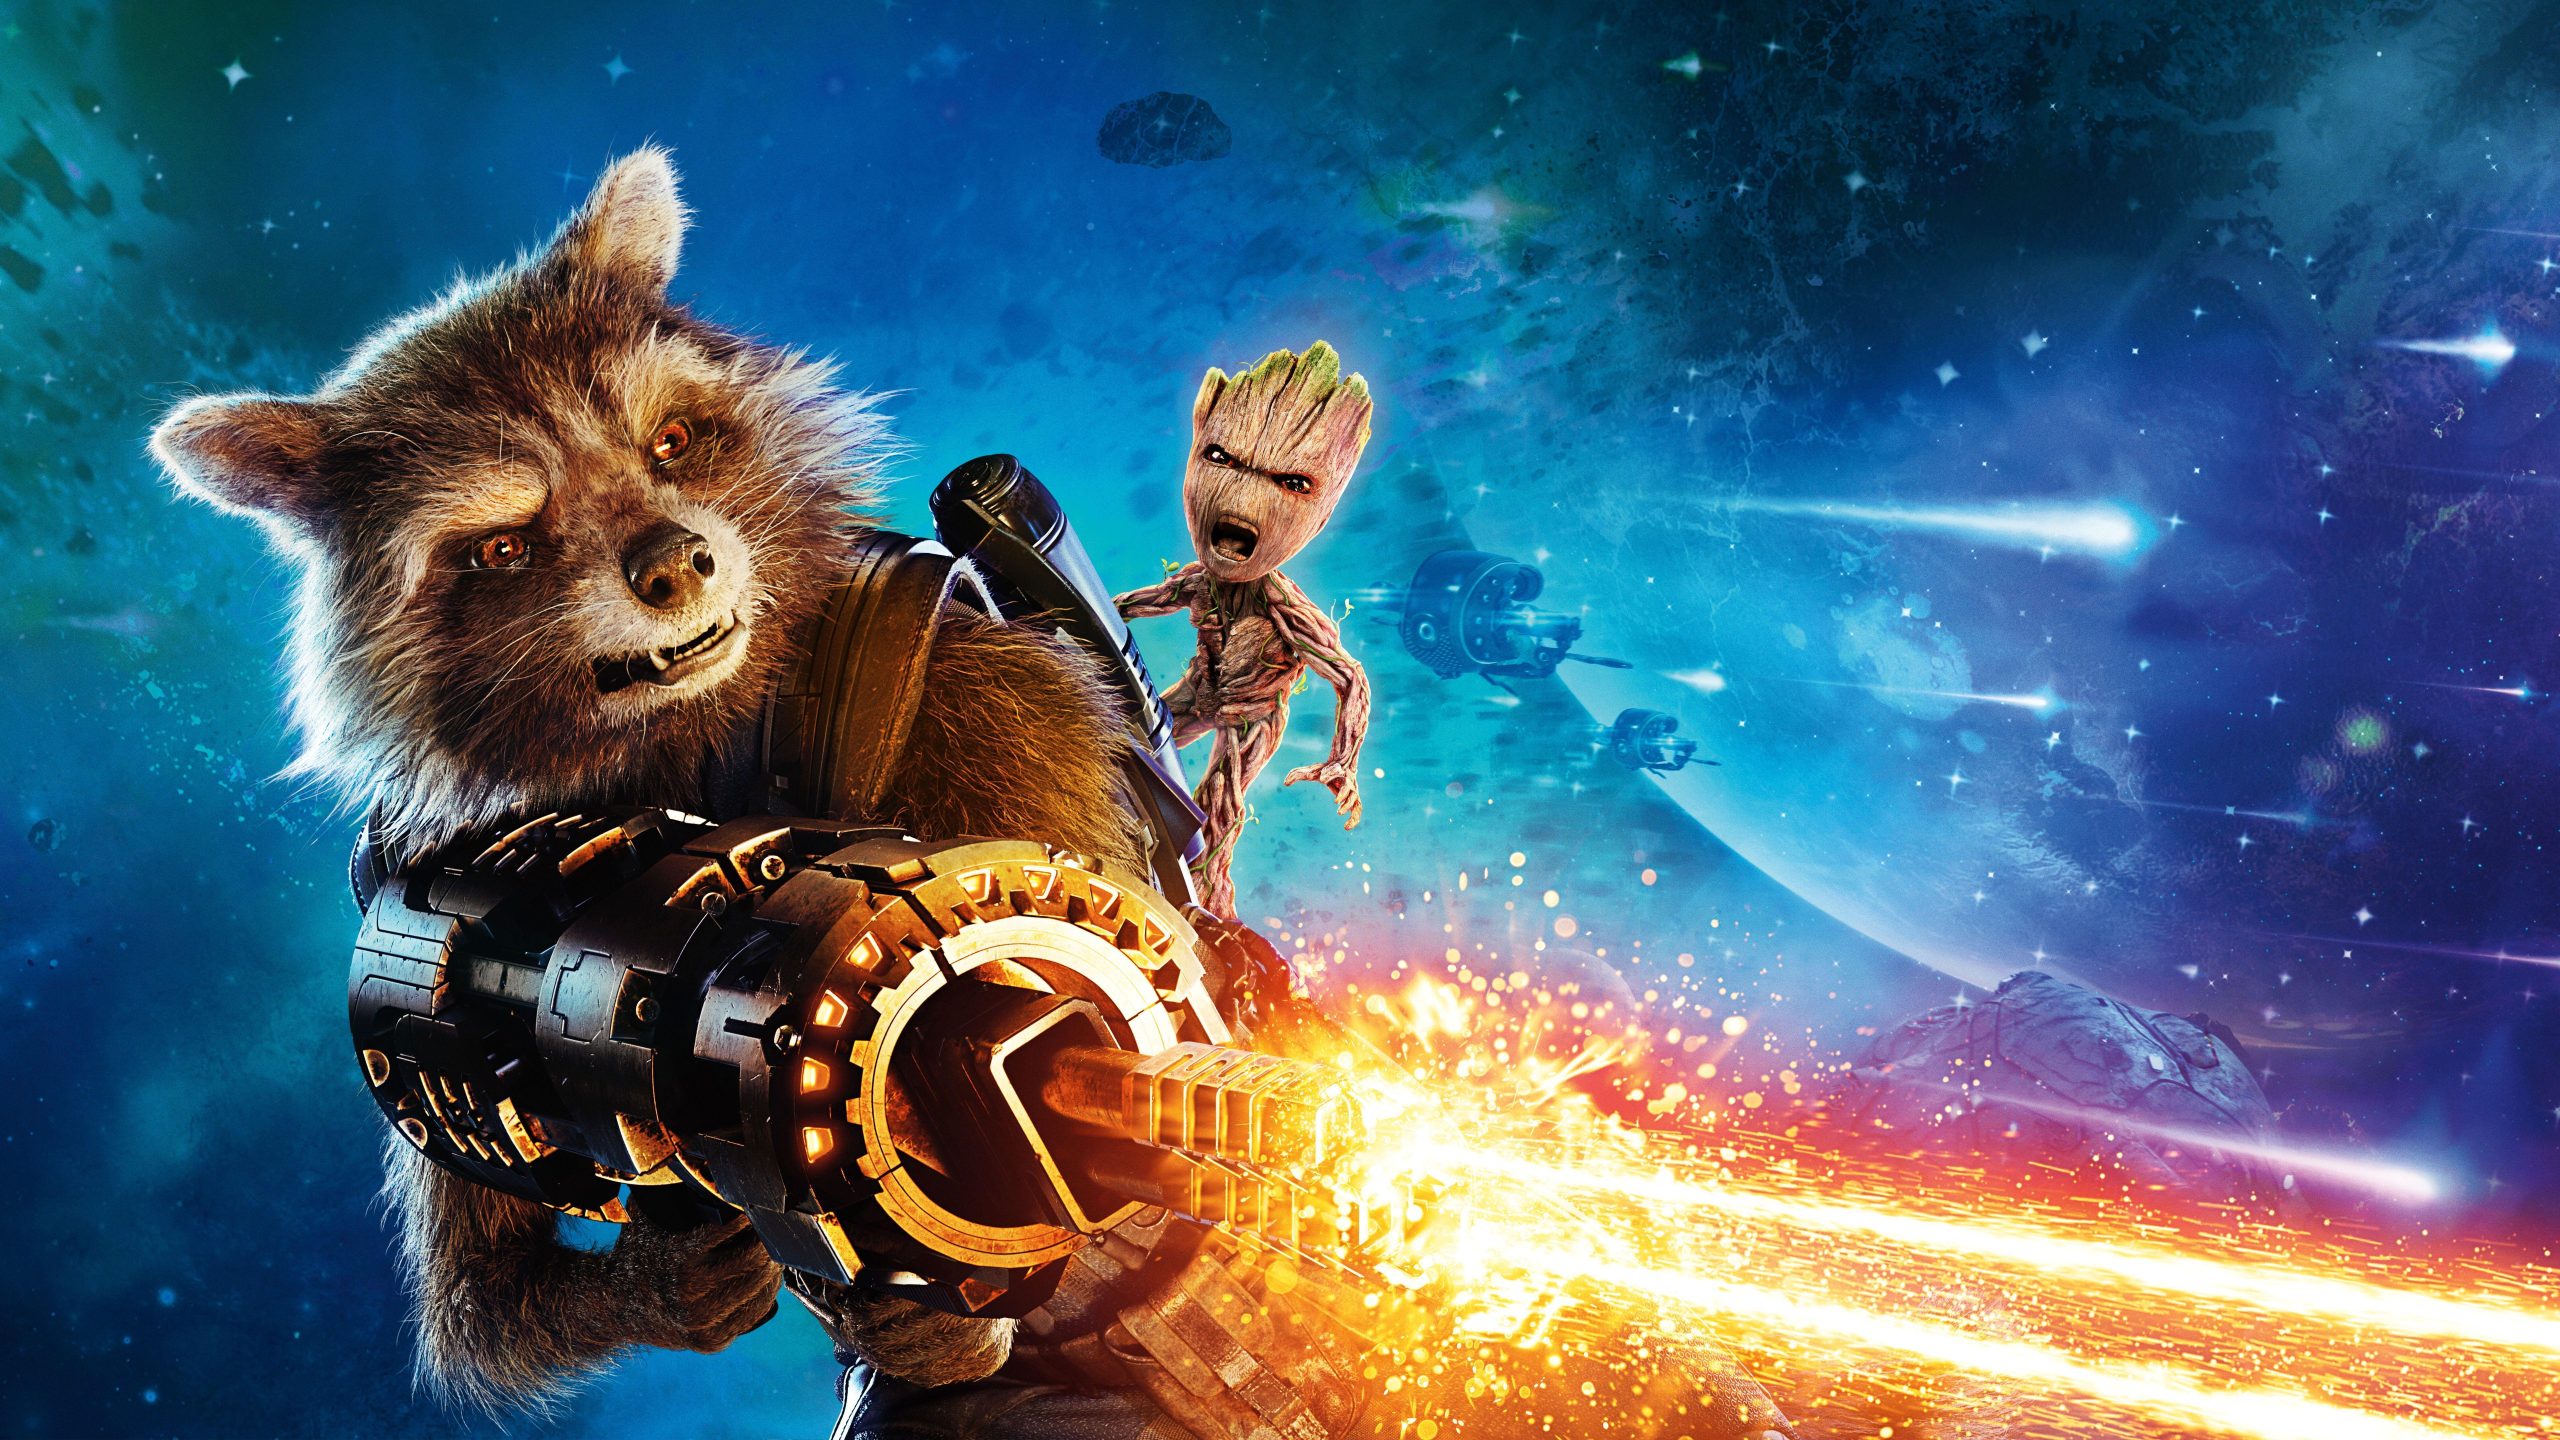 Guardians Of The Galaxy 2 Wallpaper For Pc, Guardians Of The Galaxy 2, Movies